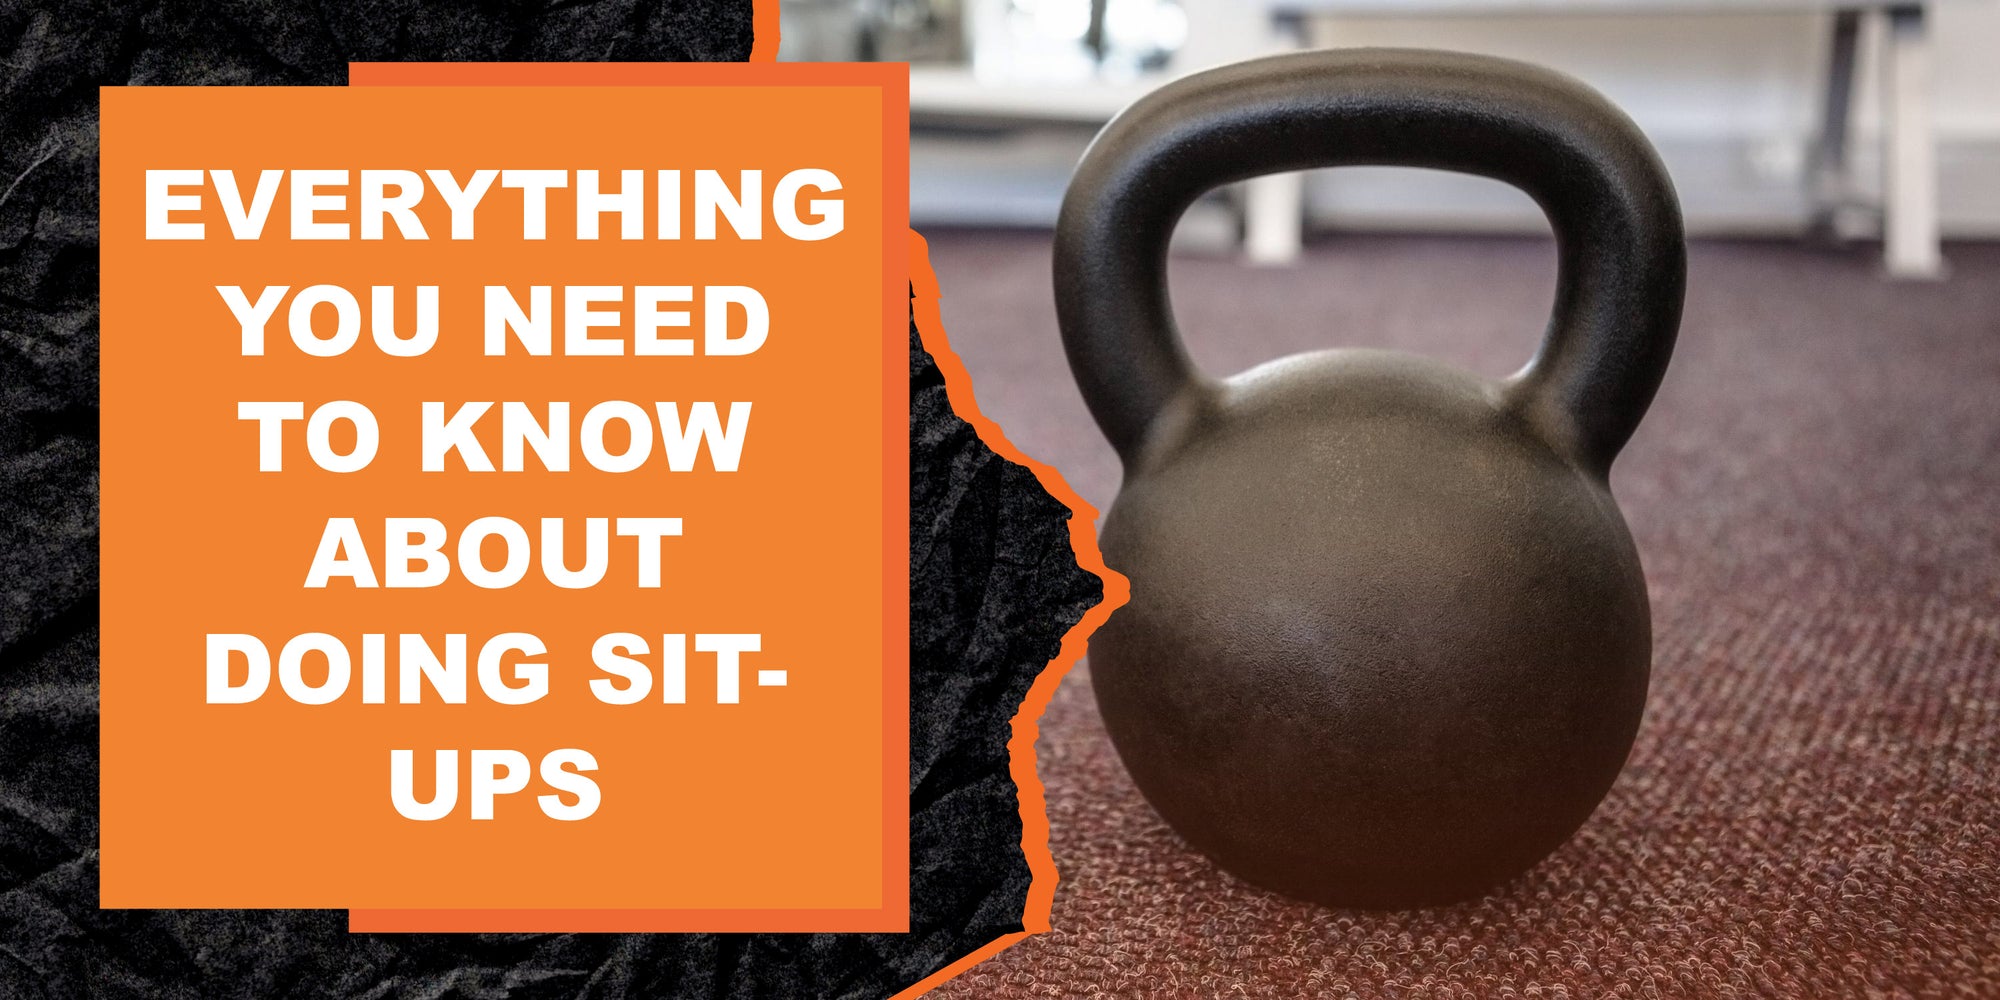 Everything You Need to Know About Doing Sit-Ups